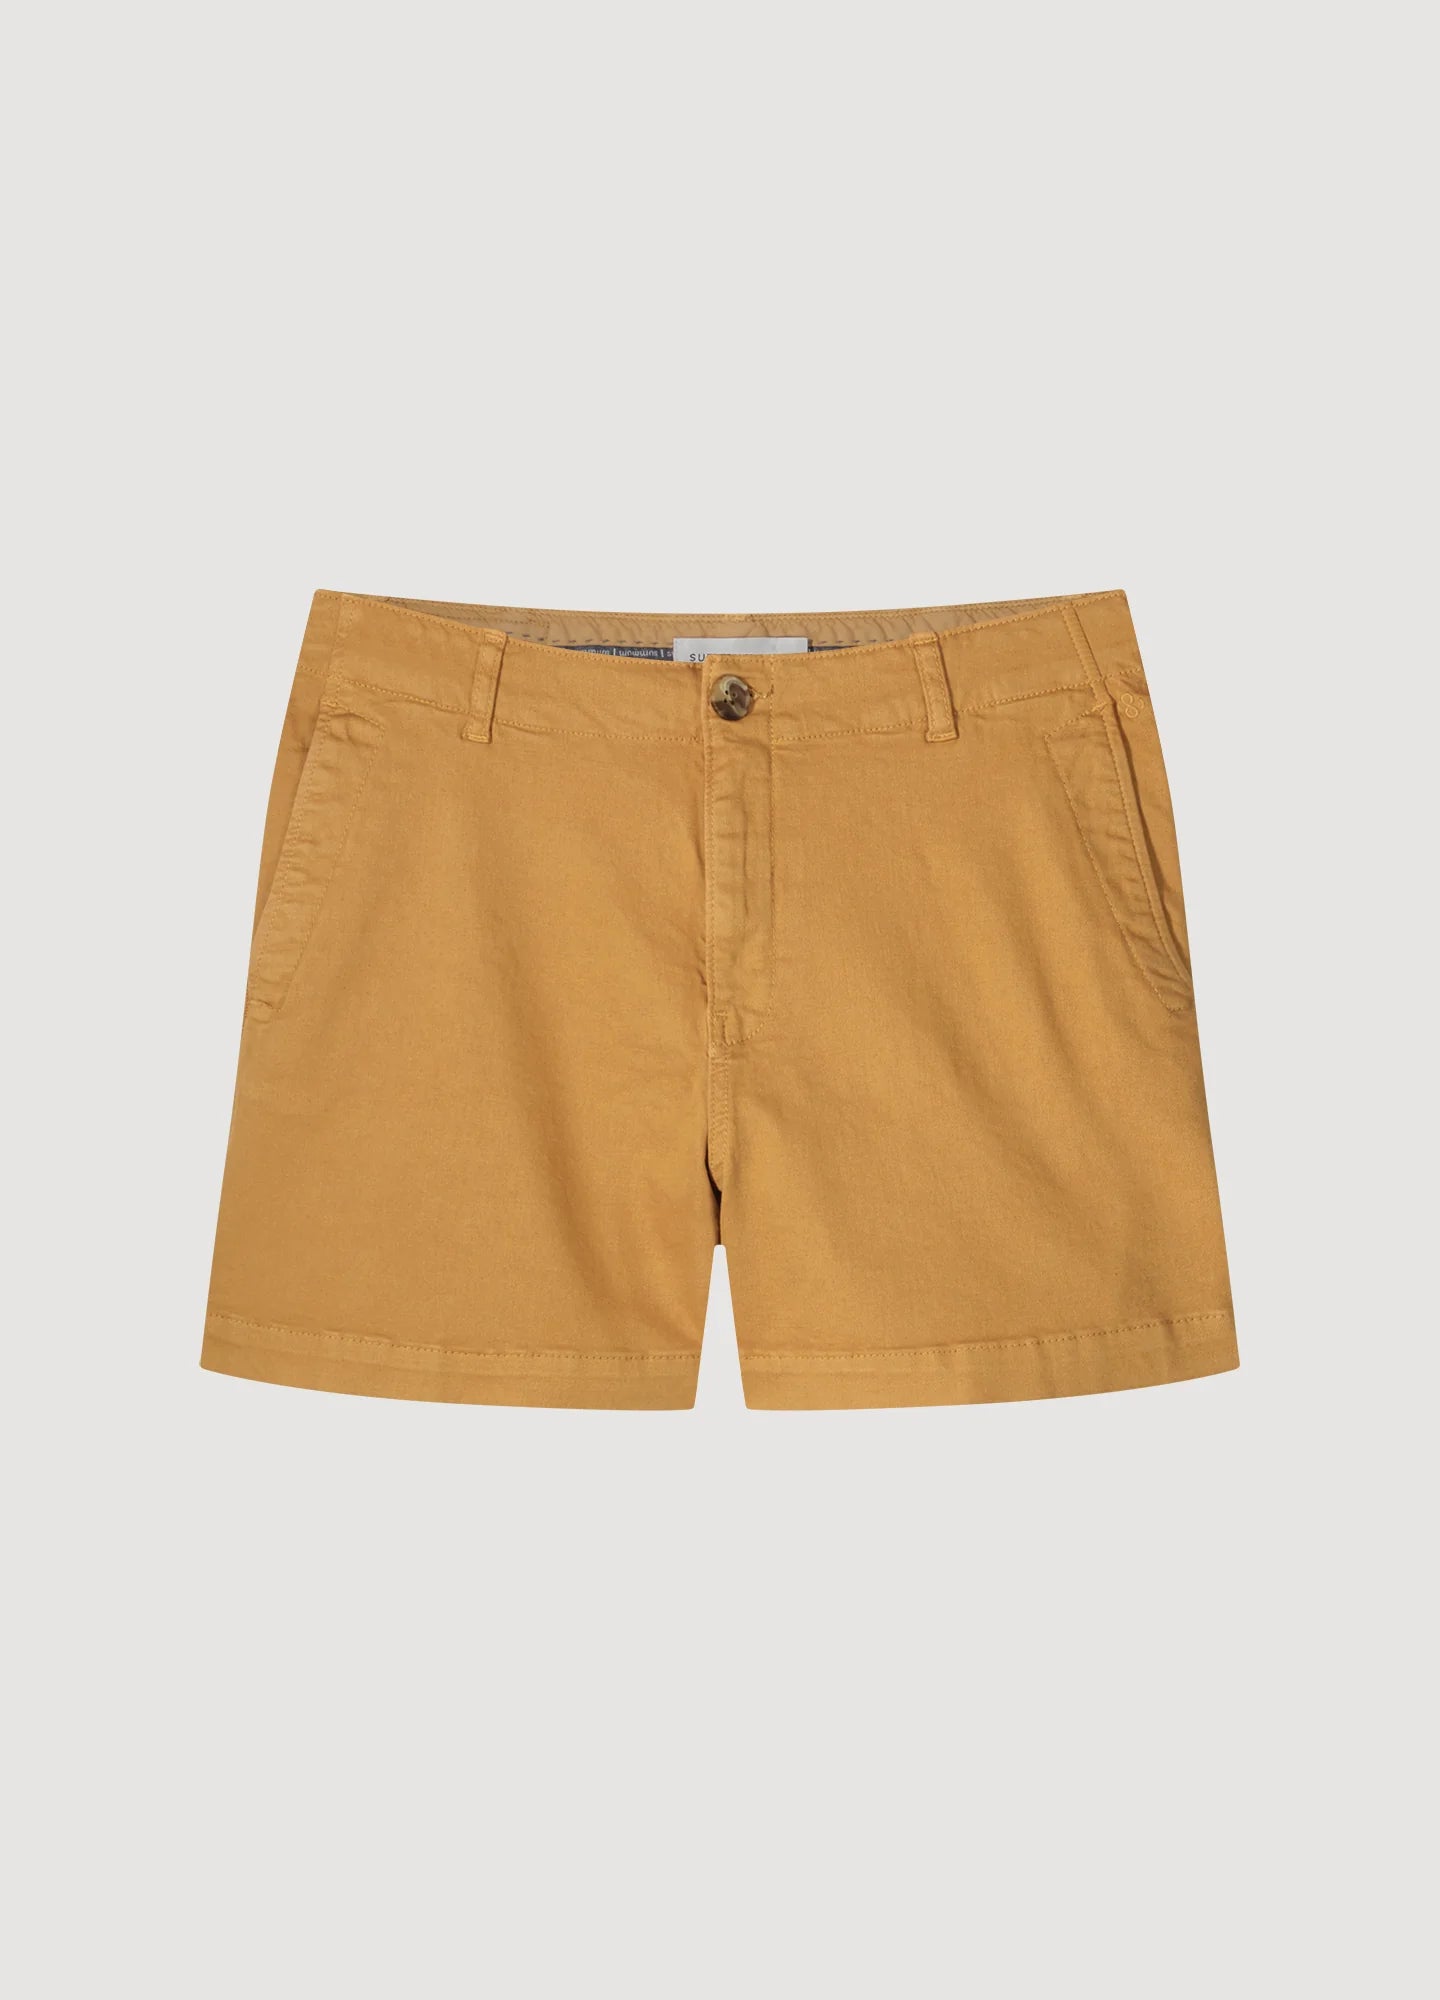 Chino Shorts in Soft Camel